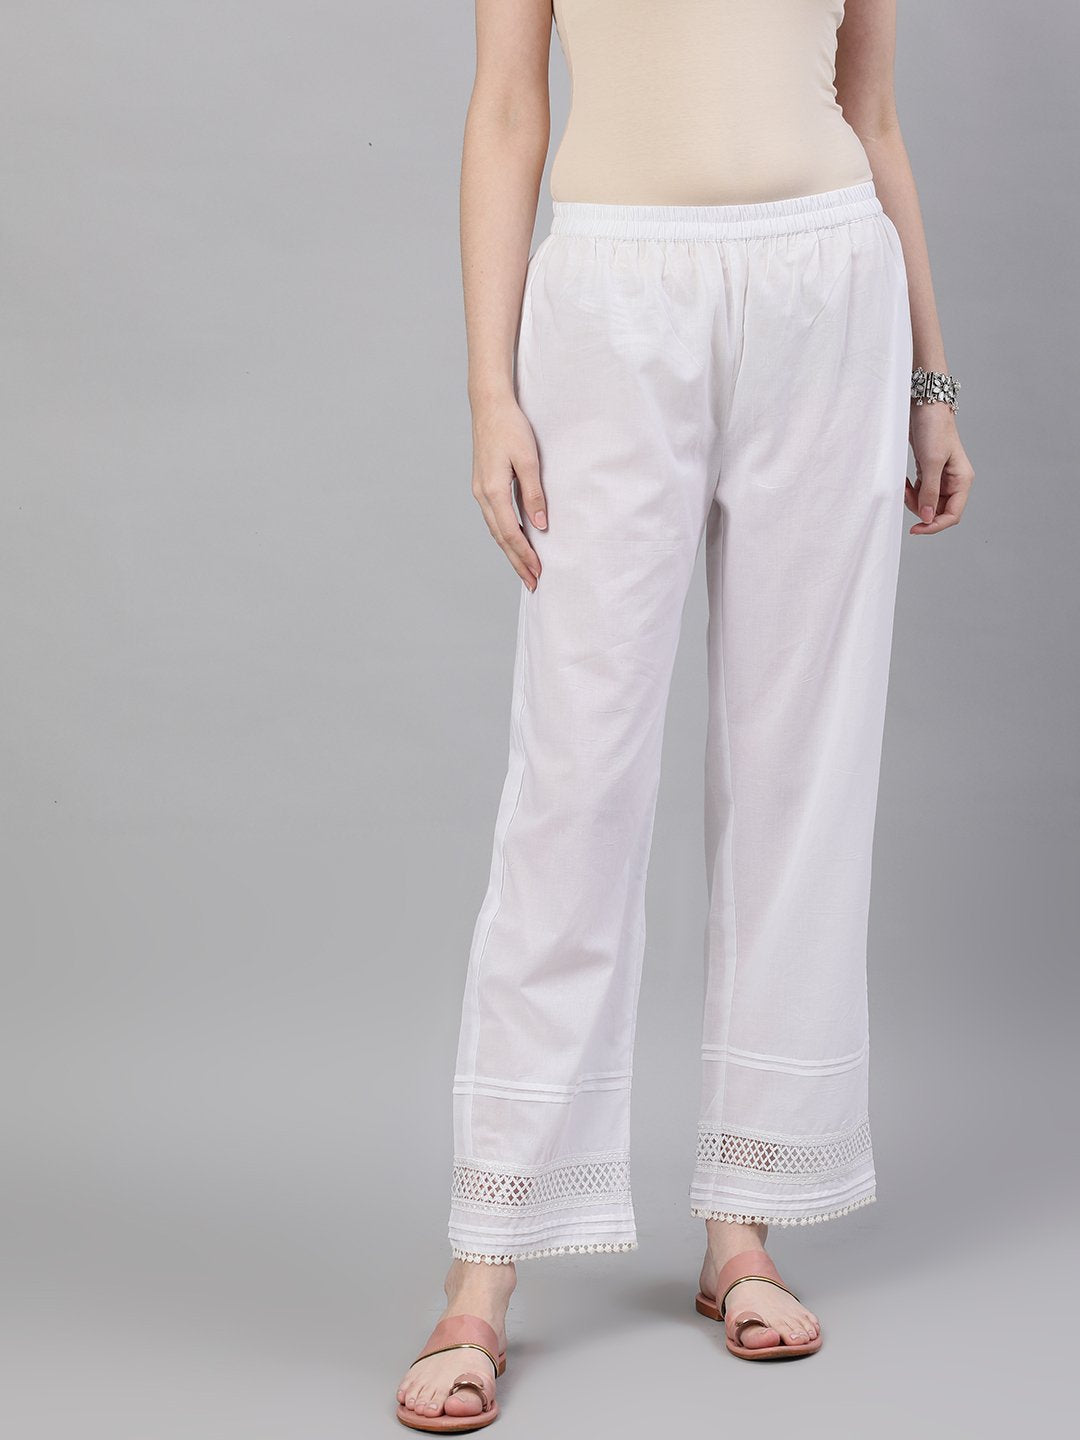 Women's White Trouser With Lace Detailing - Nayo Clothing